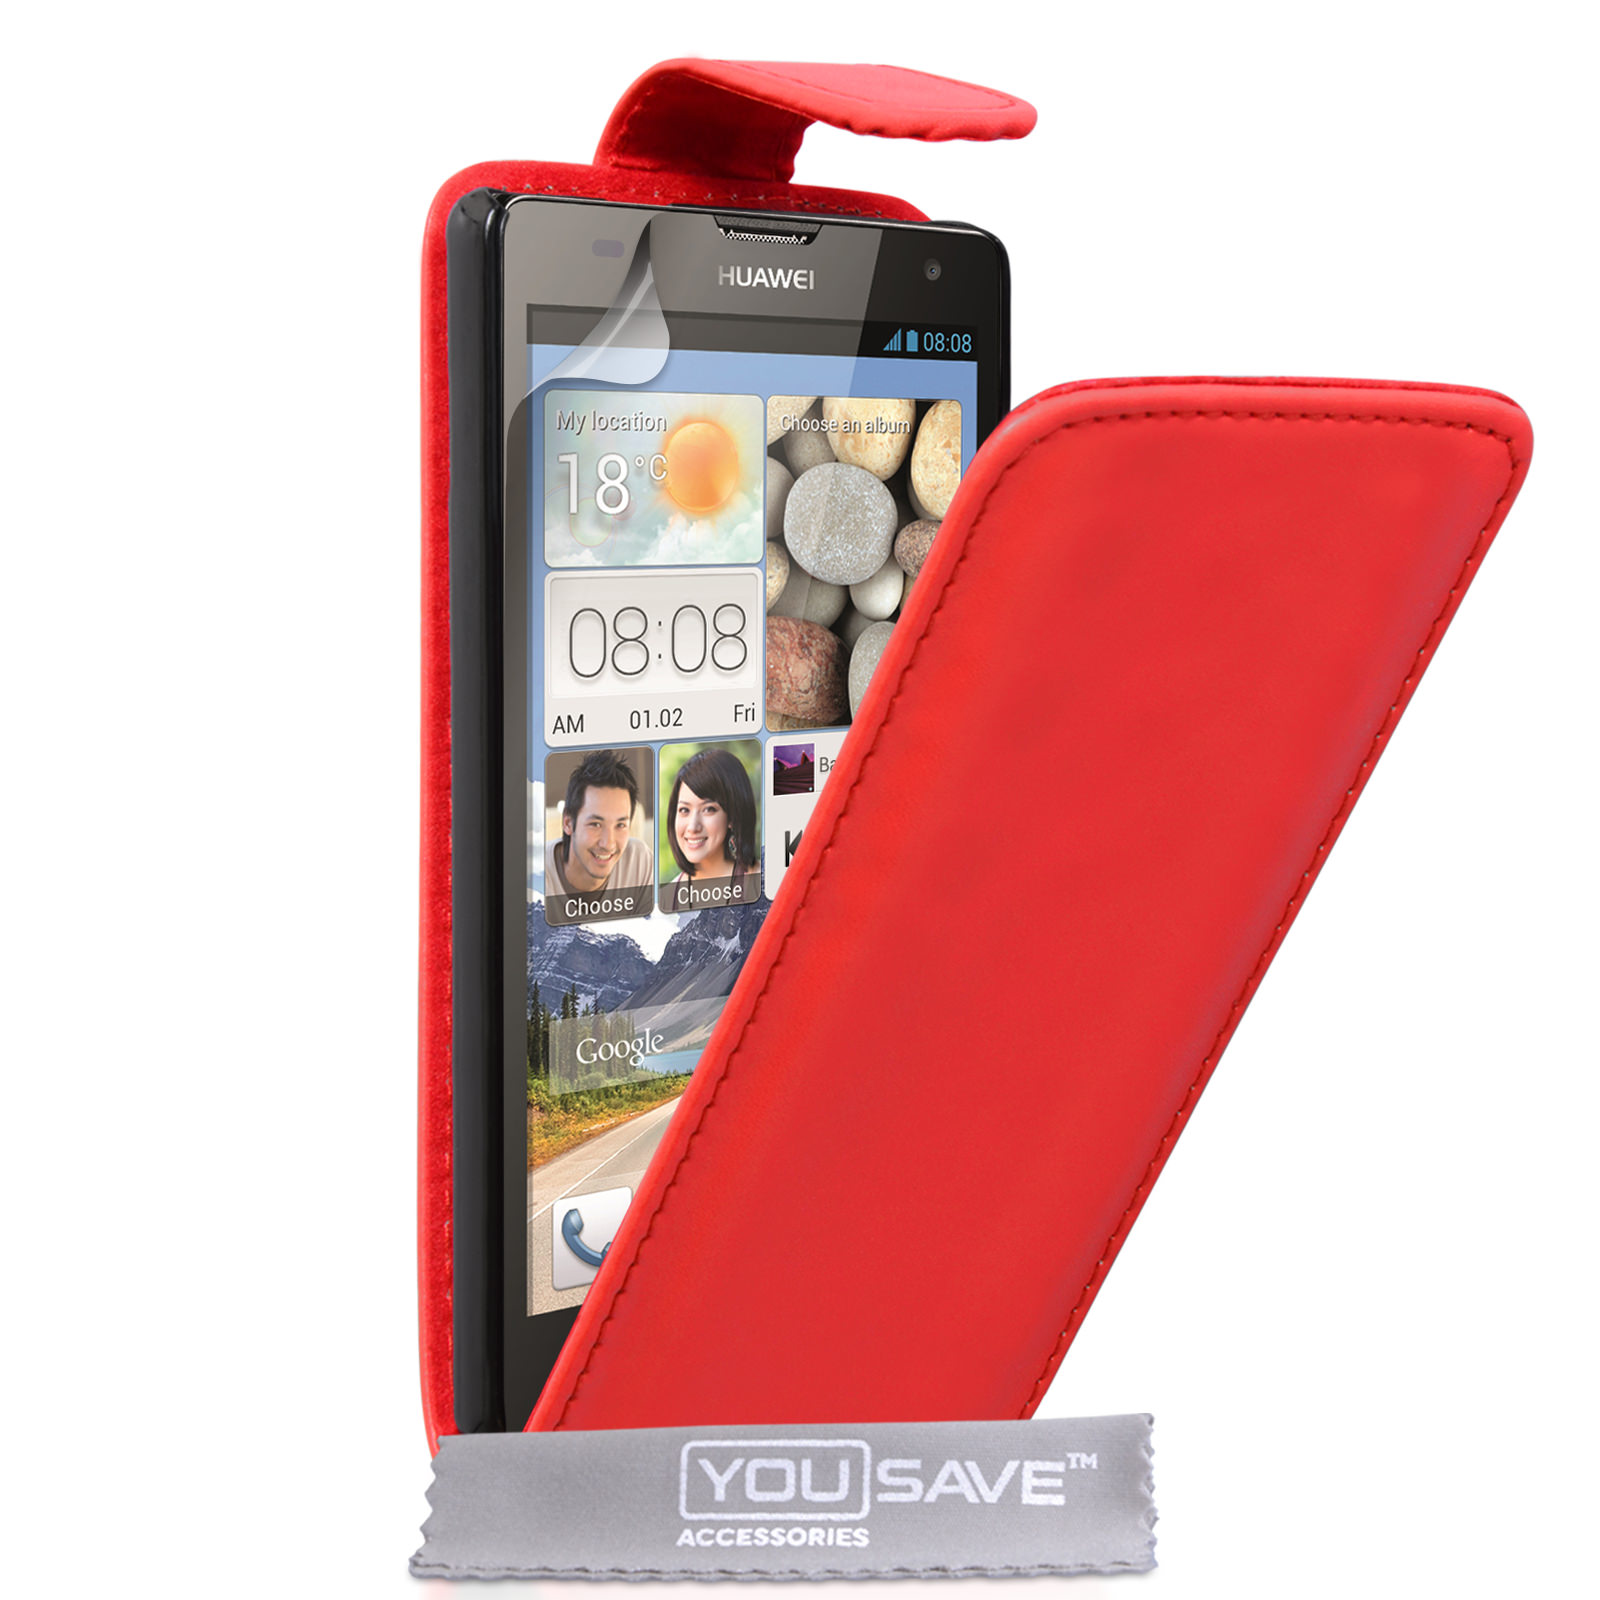 YouSave Accessories Huawei Ascend G740 Leather-Effect Flip Case - Red